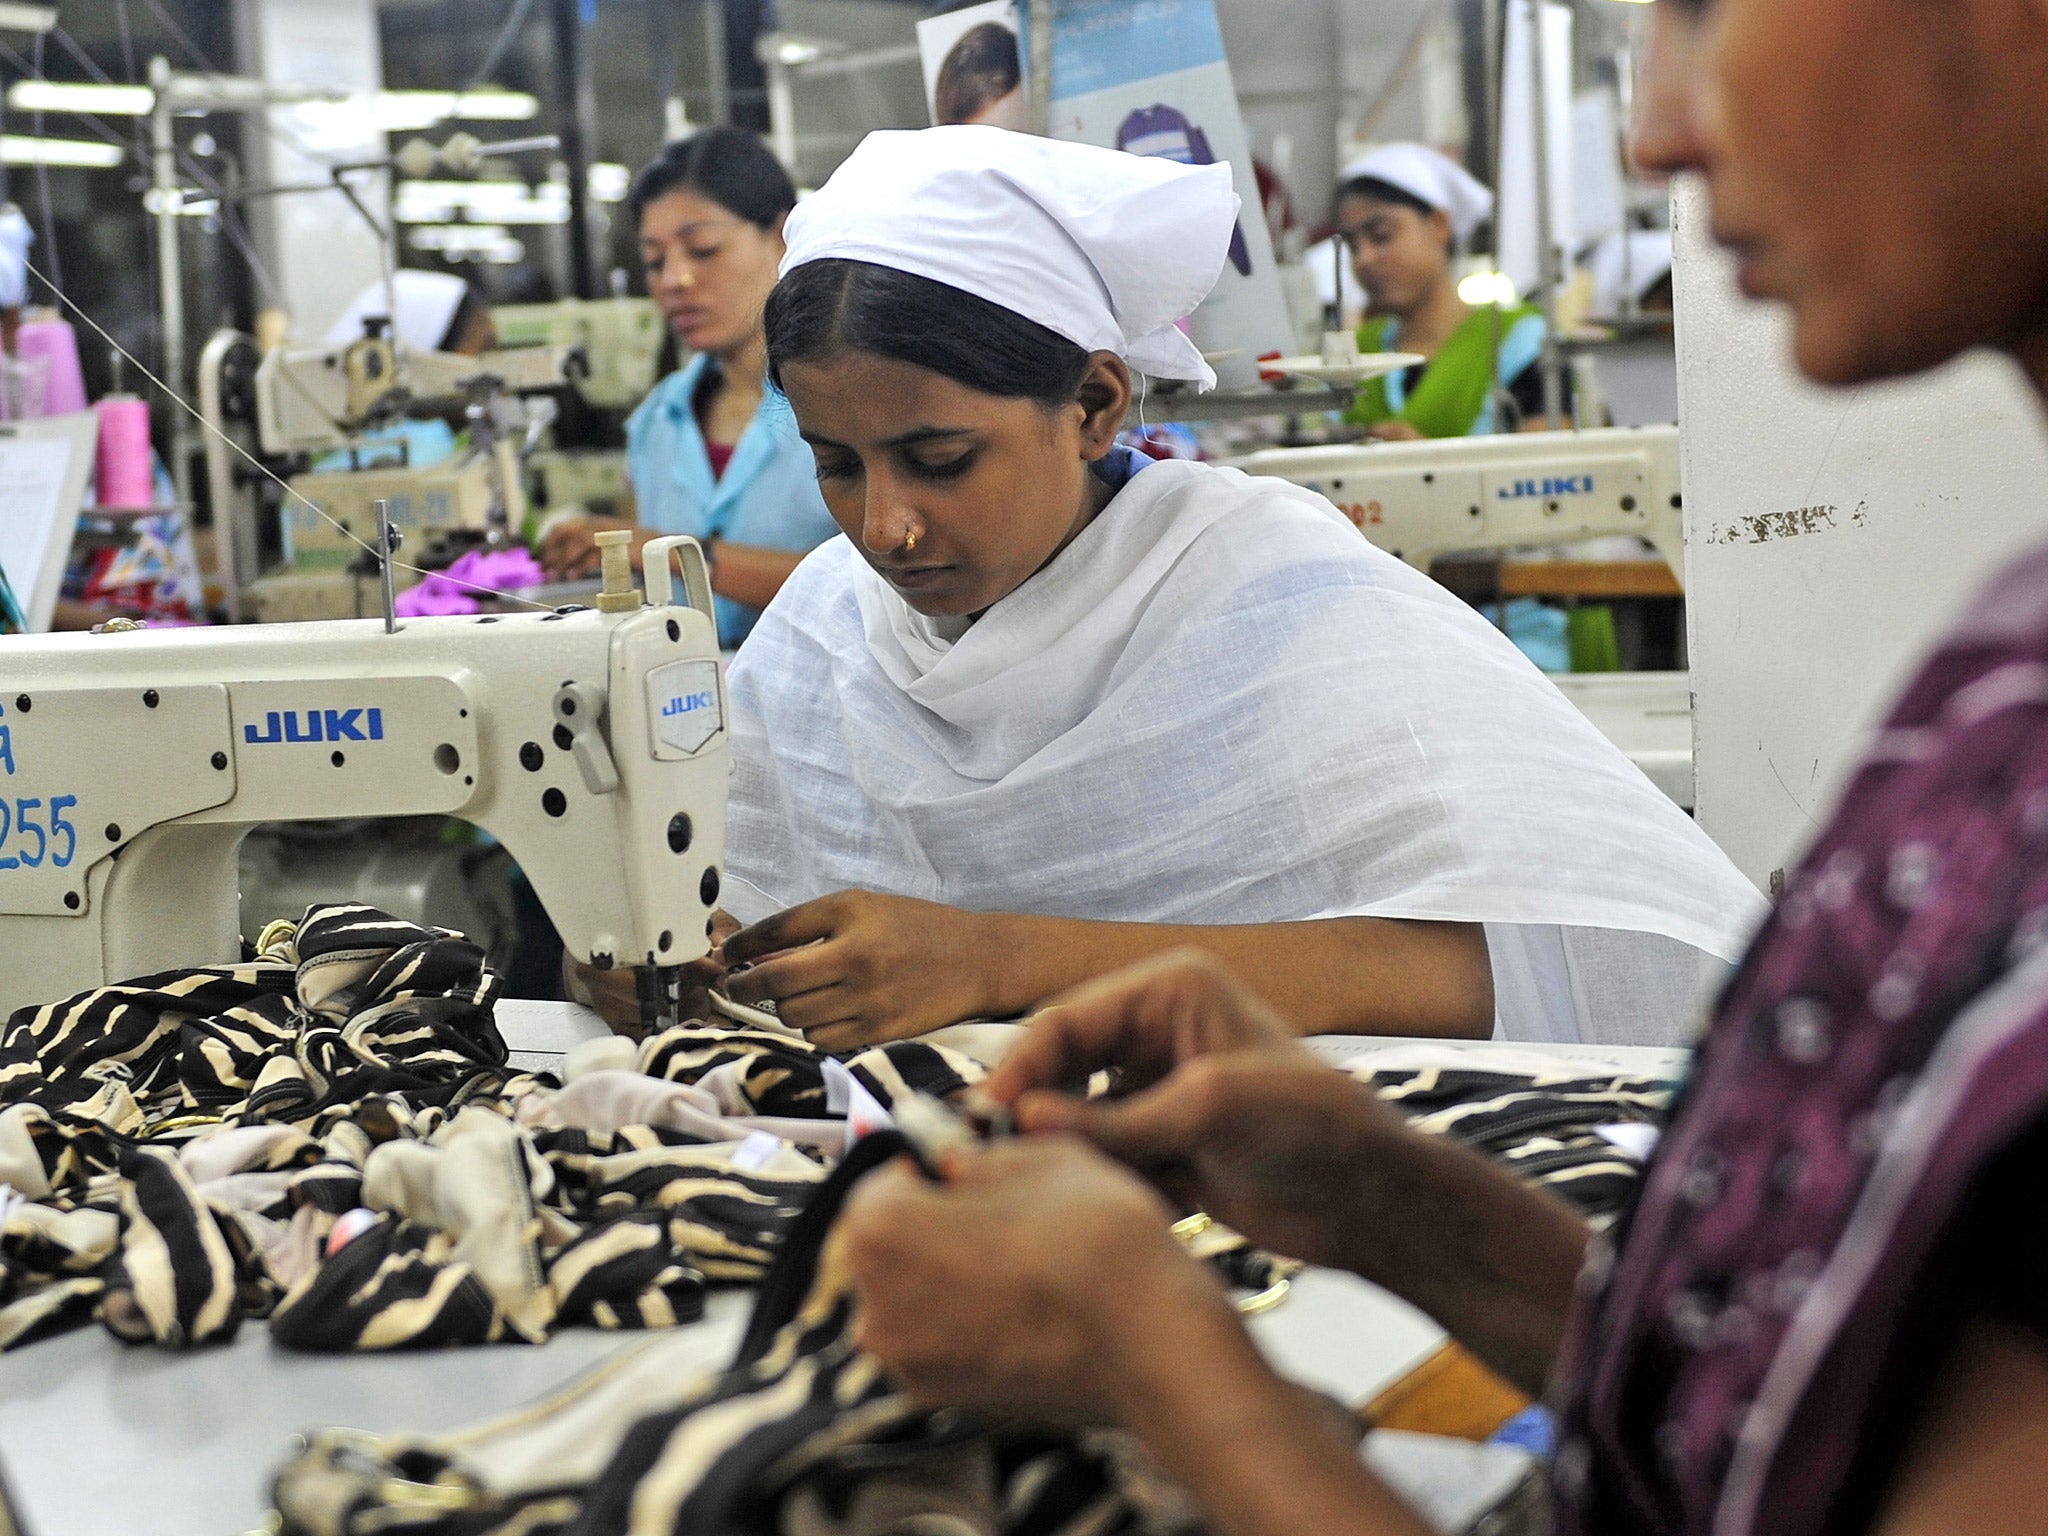 Bangladesh is the world's second-largest exporter of garments